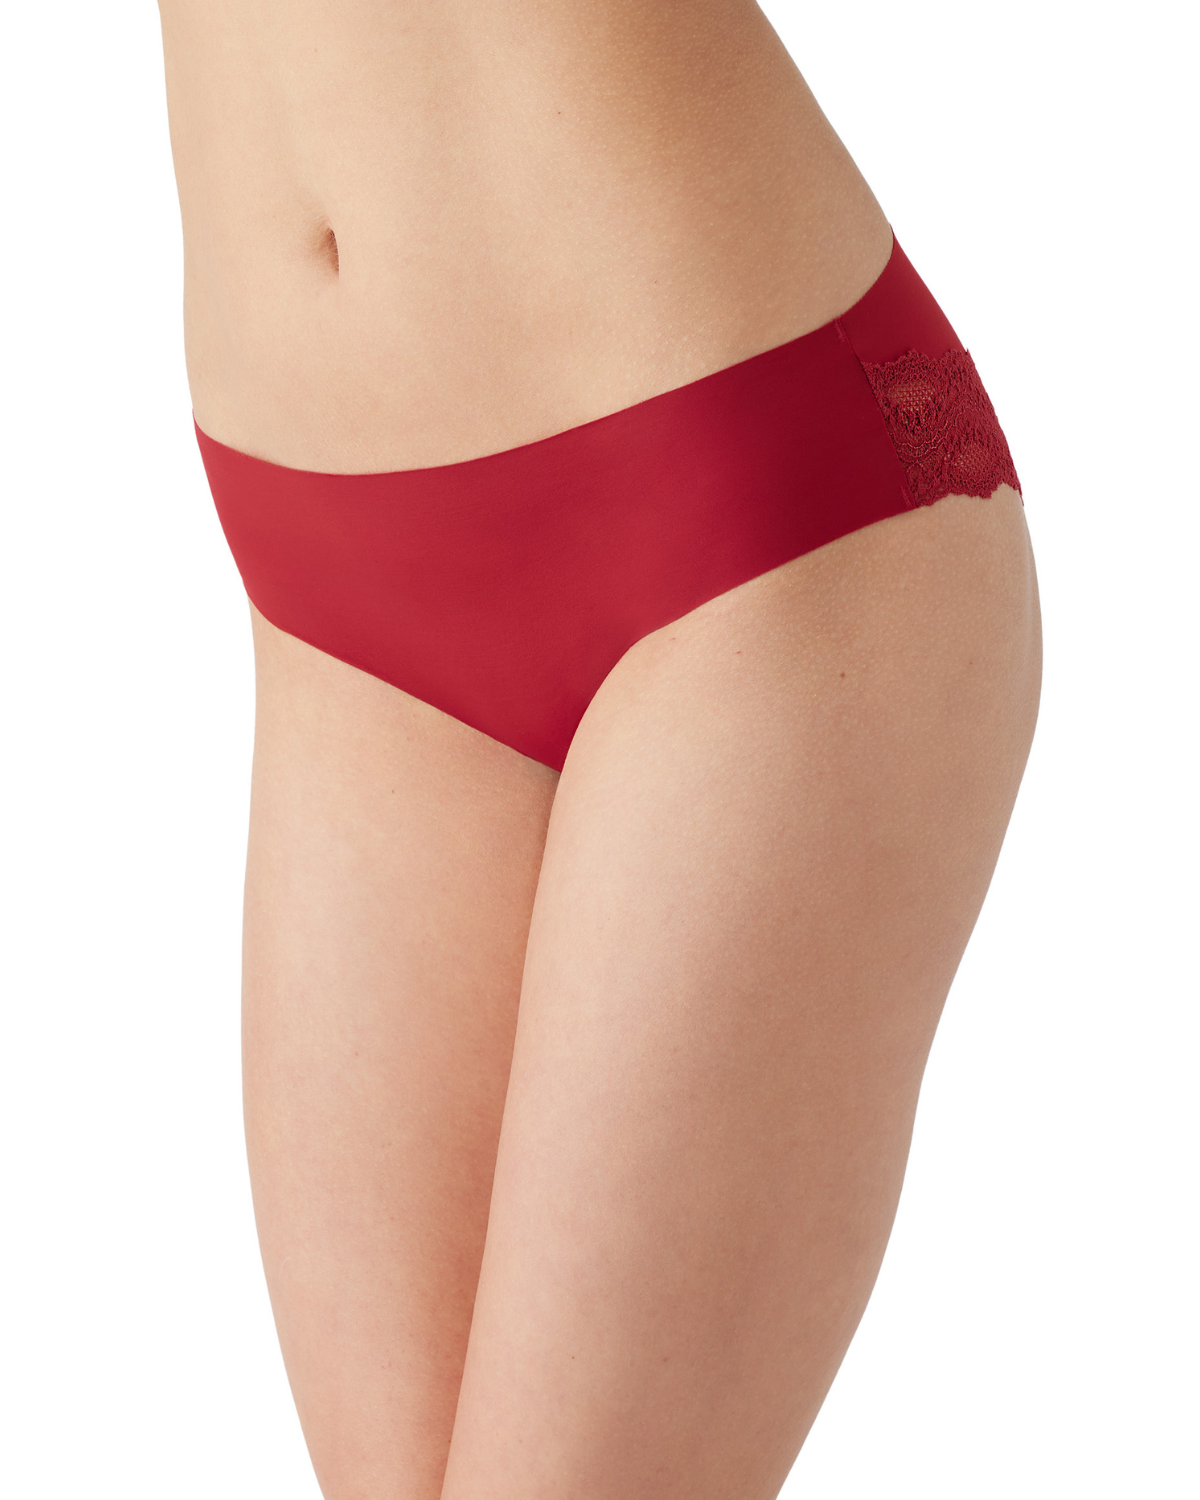 Women's red seamless hipster panty with  cheeky lace back.